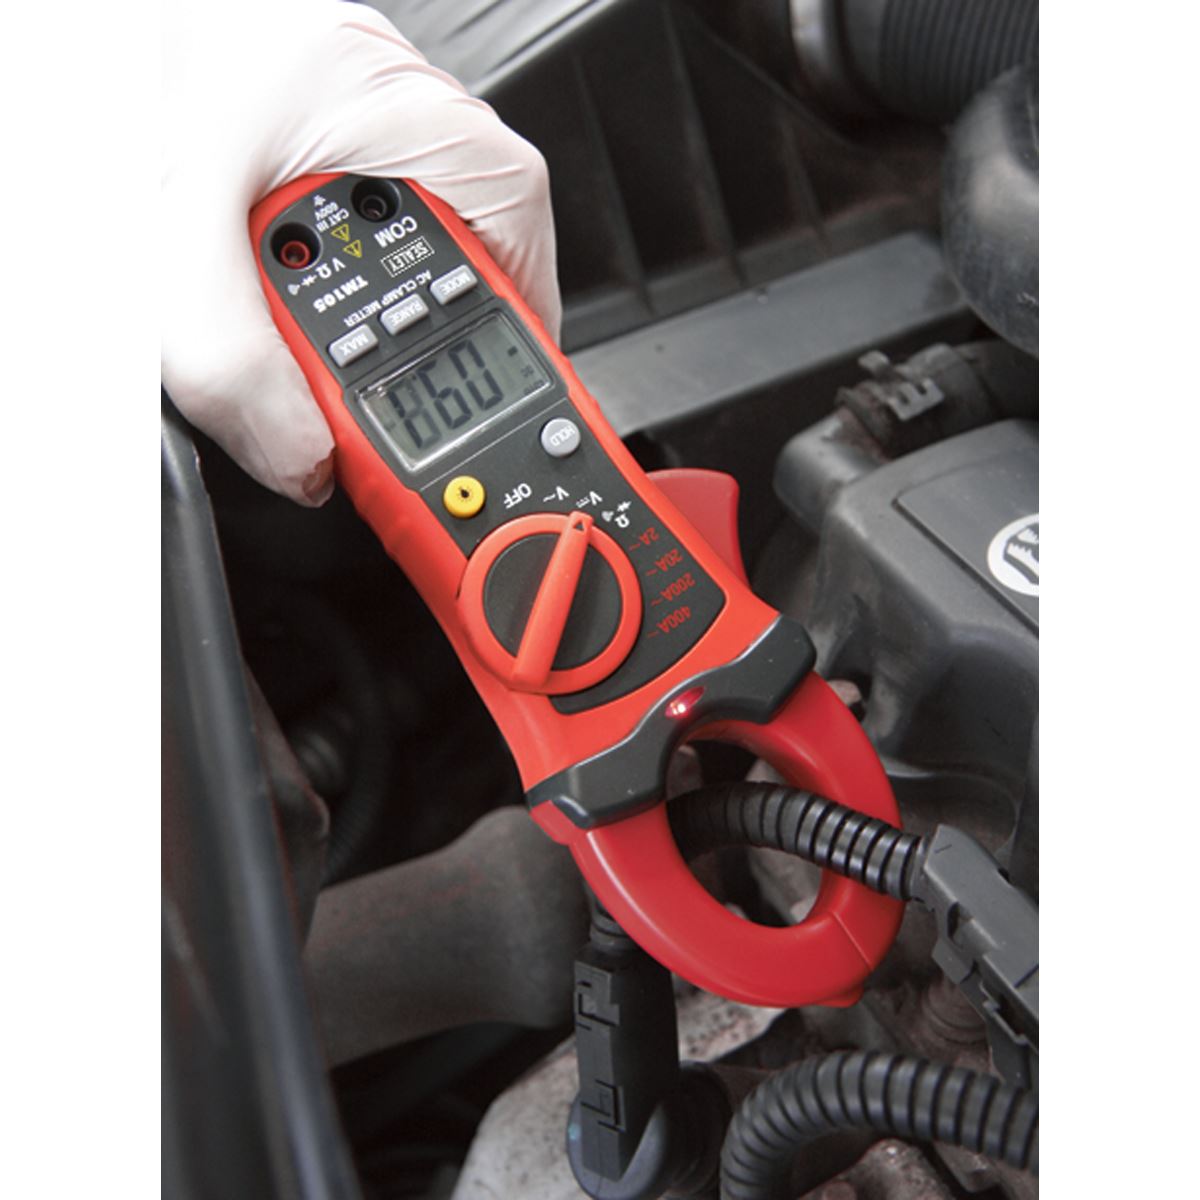 Sealey Professional Auto-Ranging Digital Clamp Meter NCVD - 6-Function